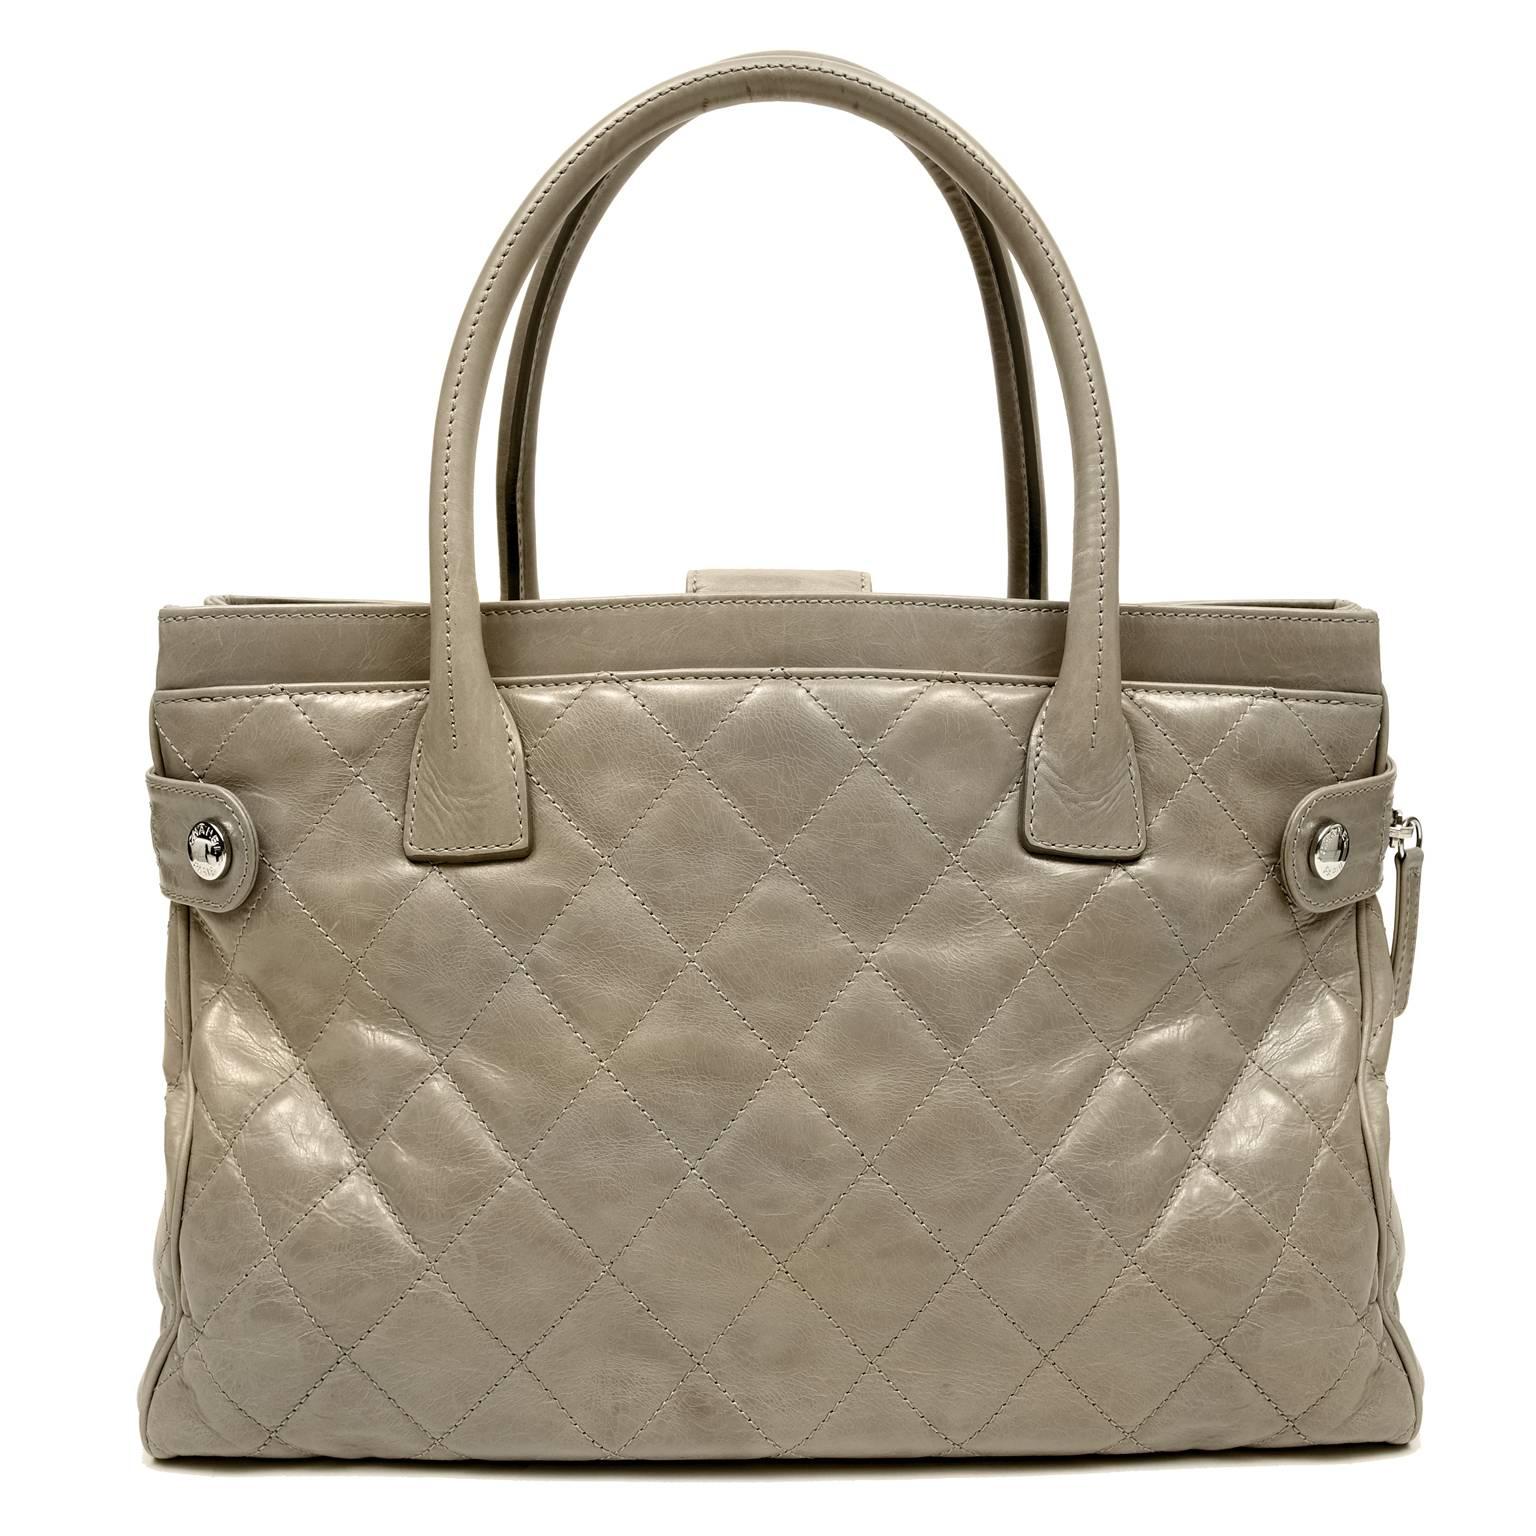 Chanel Grey Leather Portobello Tote- PRISTINE
 An excellent choice for a polished daily appearance, the Portobello is roomy and well-appointed for organization.  

Grey mildly distressed leather is quilted in signature Chanel diamond stitched